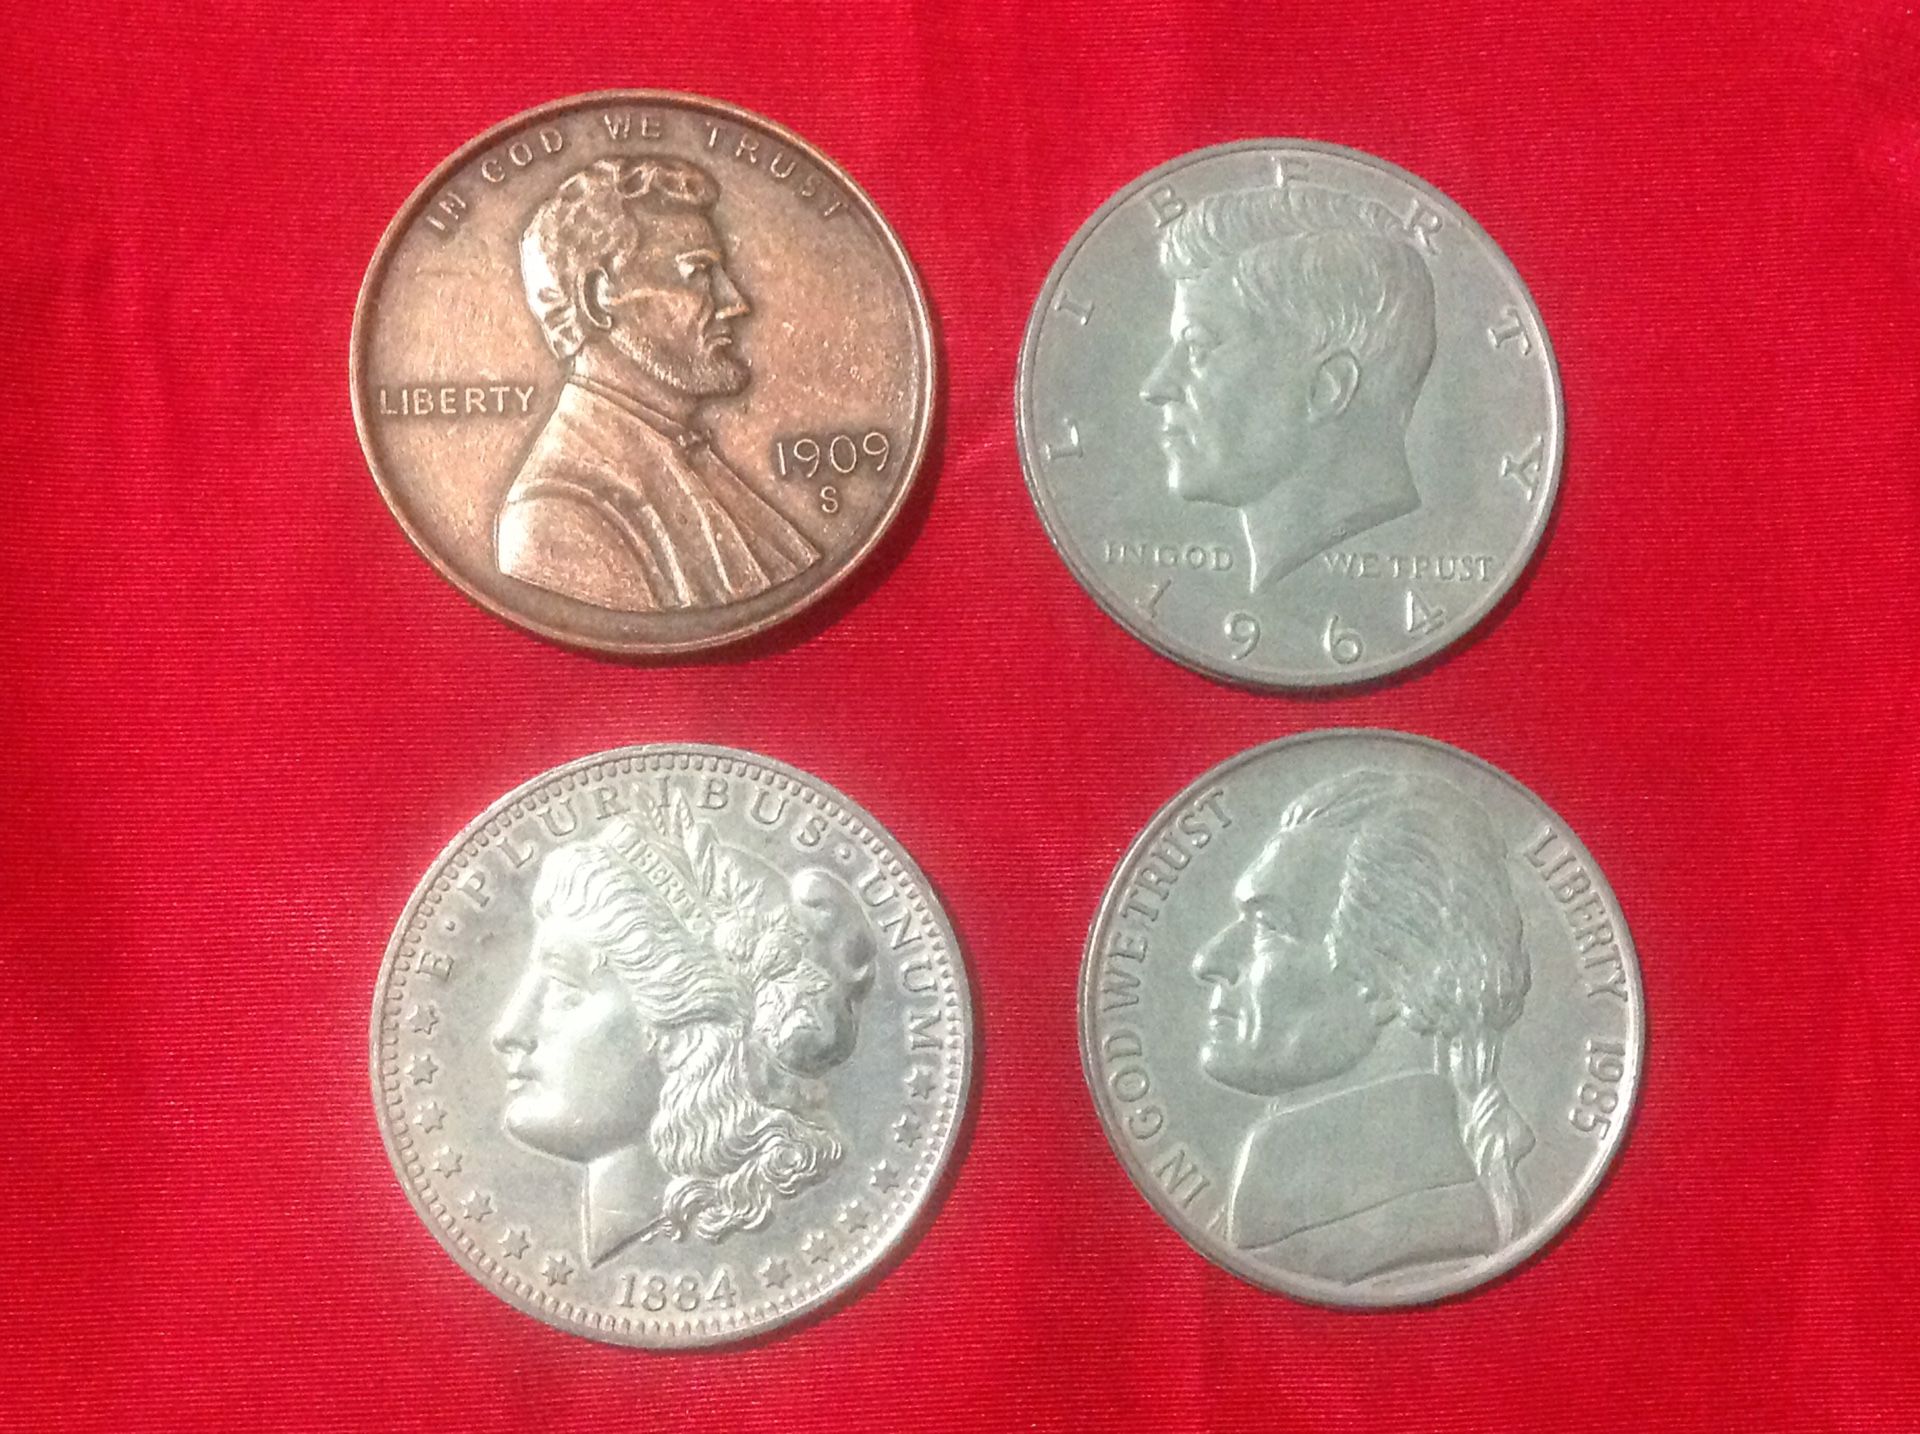 Large Novelty Coins/Paperweights, set of 4 Penny, Nickel, Half Dollar, Dollar